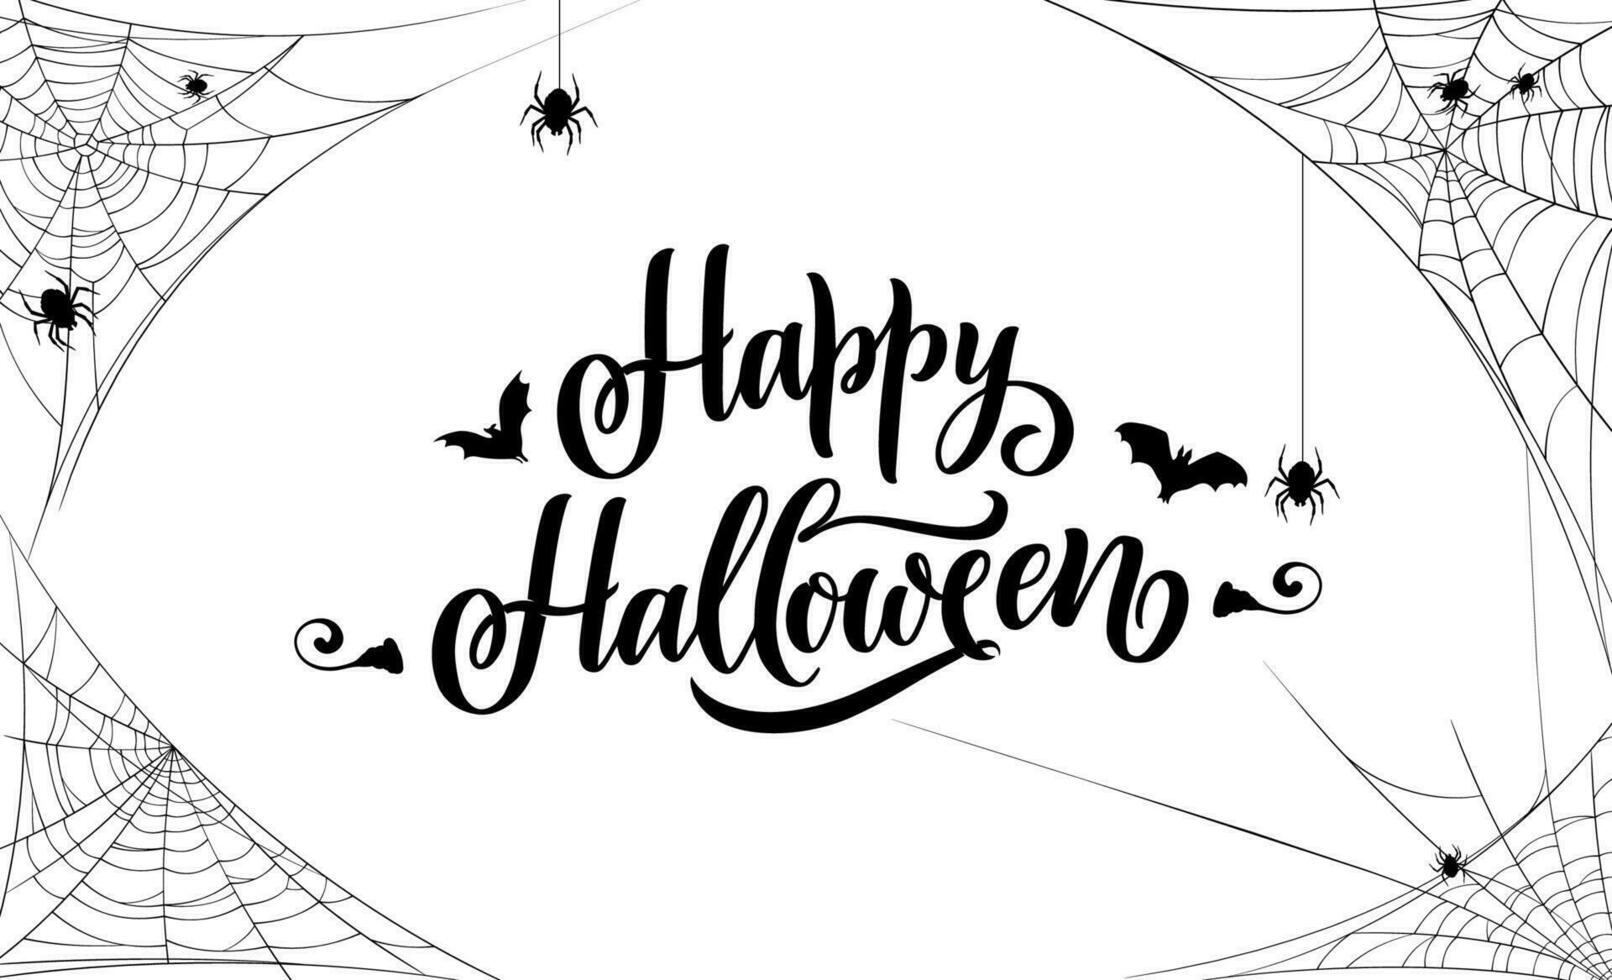 Happy Halloween banner with cobweb and spiders vector